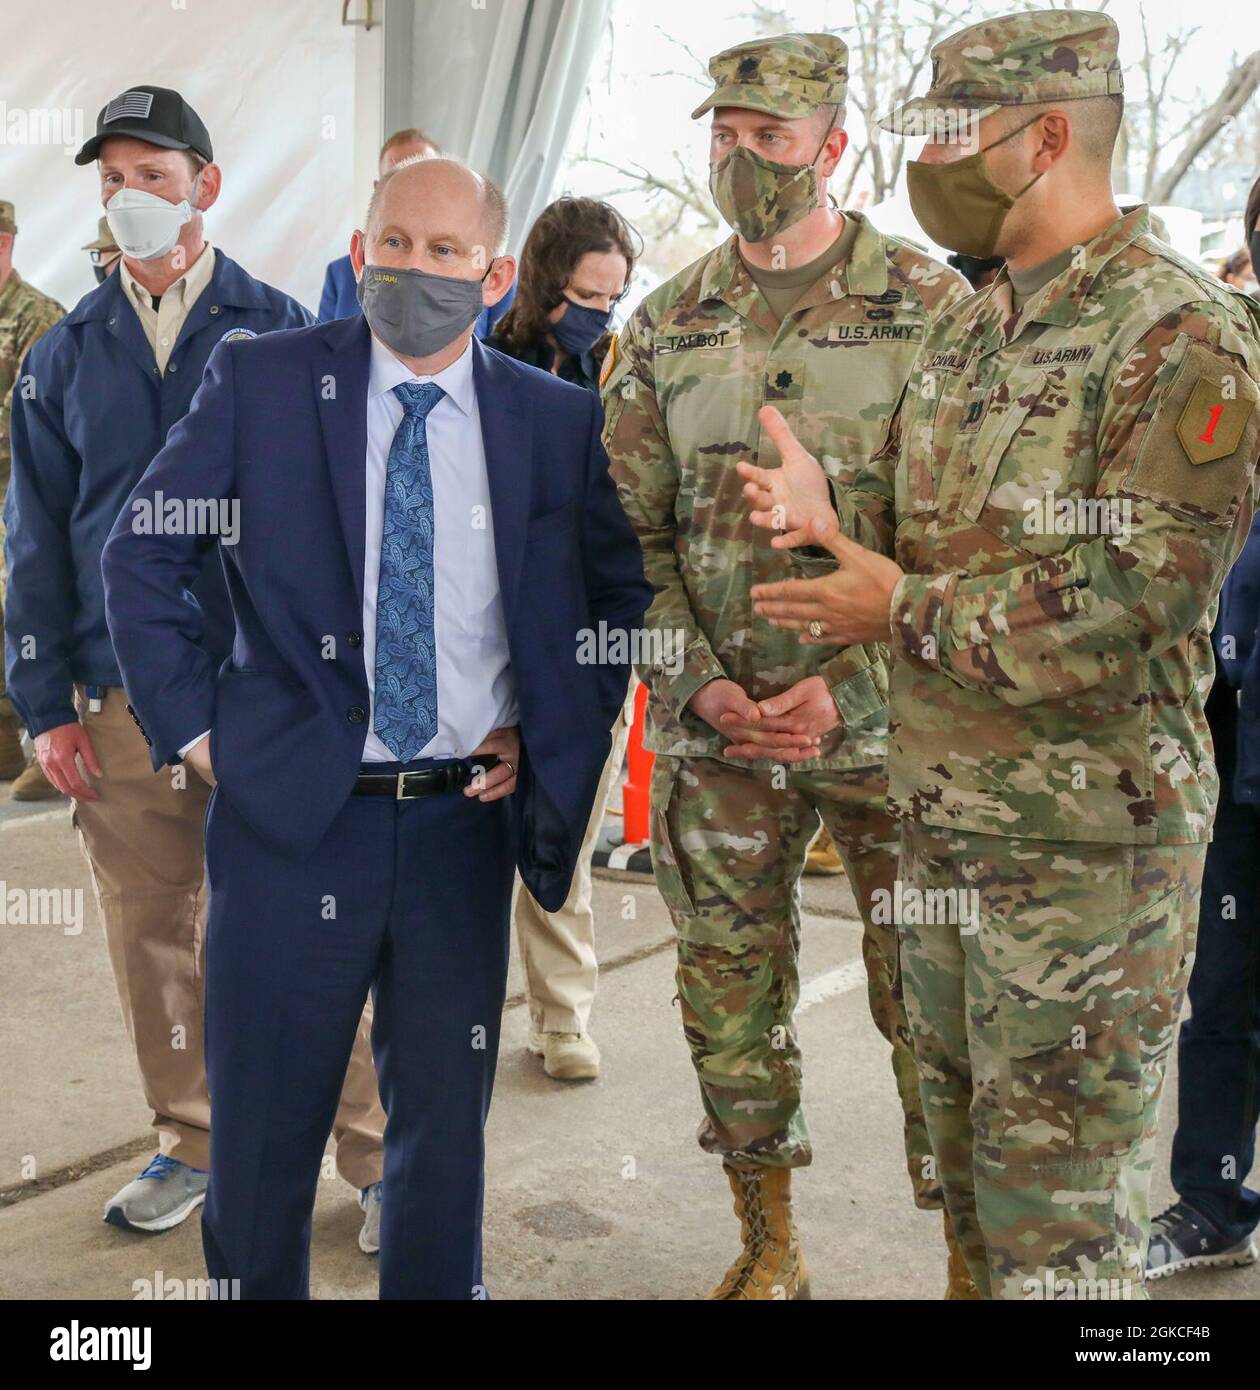 Honorable John E. Whitley, Acting U.S. Secretary of the Army, and U.S. Army Lt. Col. Nicholas Talbot, 1st Battalion, 63rd Armor Battalion, 2nd Armored Brigade Combat Team, 1st Infantry Division, commander, speak with U.S. Army Cpt. Anthony Davila, Bravo Company, 1st Combined Arms Battalion, 63rd Armor Battalion, 2nd Armored Brigade Combat Team, 1st Infantry Division, commander, at the Fair Park Community Vaccination Center (CVC) in Dallas, March 12, 2021. Davila discussed CVC operations and how U.S. Army 1st Infantry Division Soldiers were working to assist the Federal Emergency Management Age Stock Photo